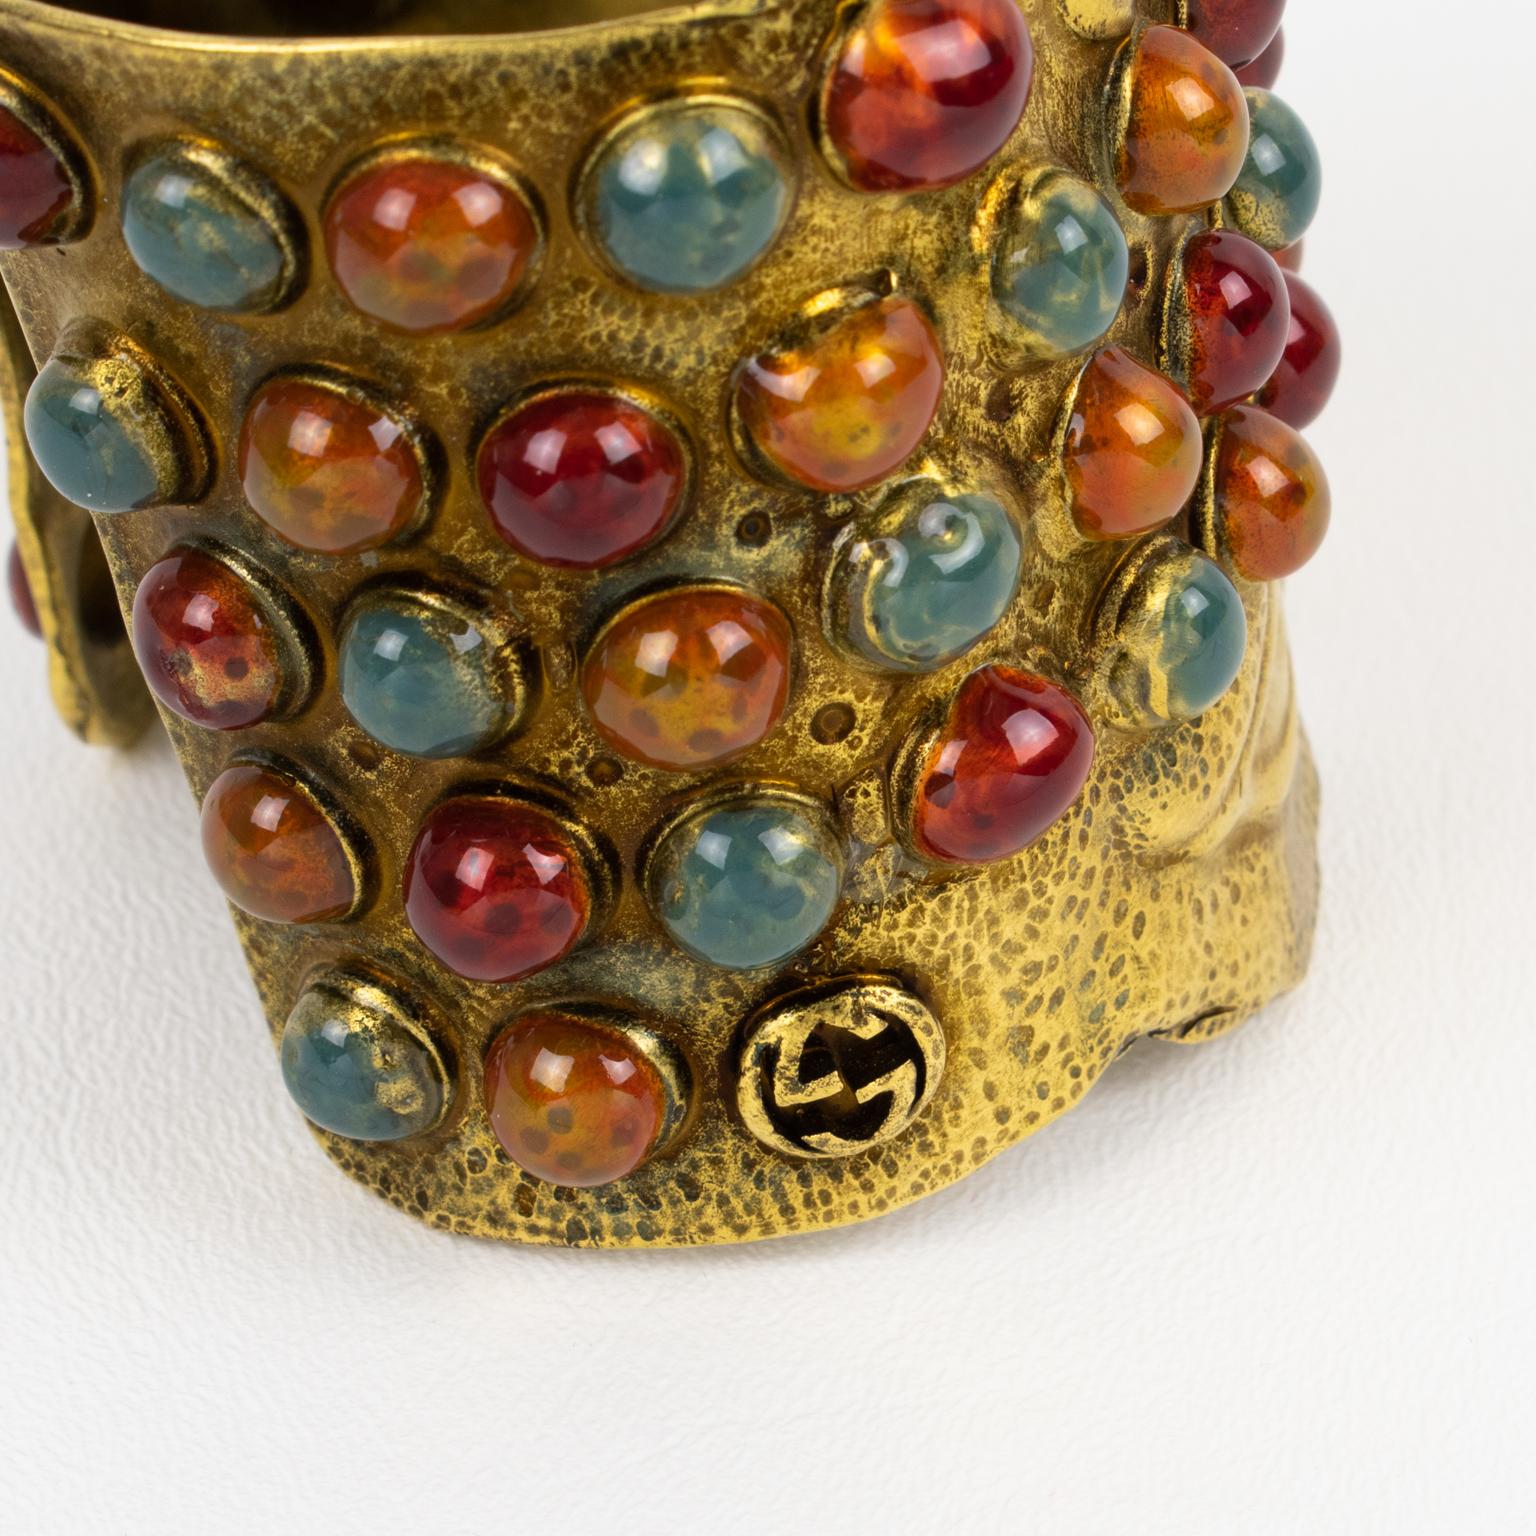 Gucci Italy 2020 Runway Cruise Collection Jeweled Gilt Metal Cuff Bracelet For Sale 3